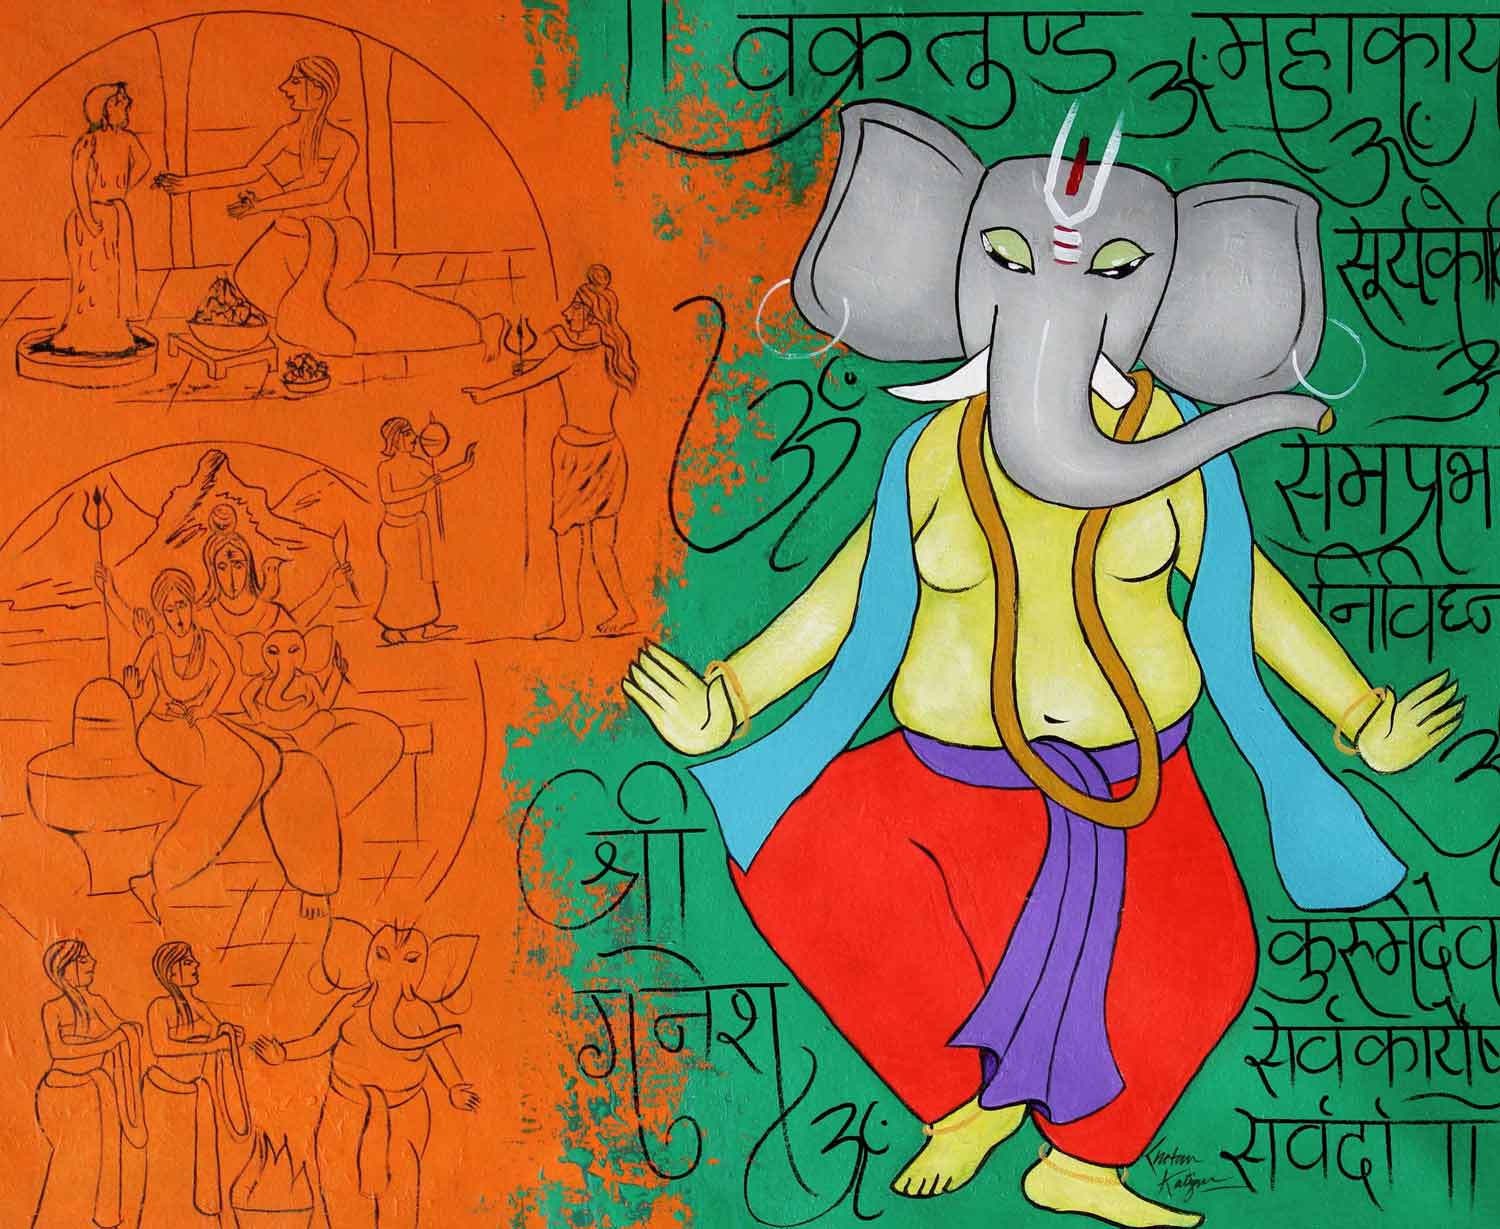 Figurative Painting with Acrylic on Canvas "Story of Ganesha" art by Chetan Katigar